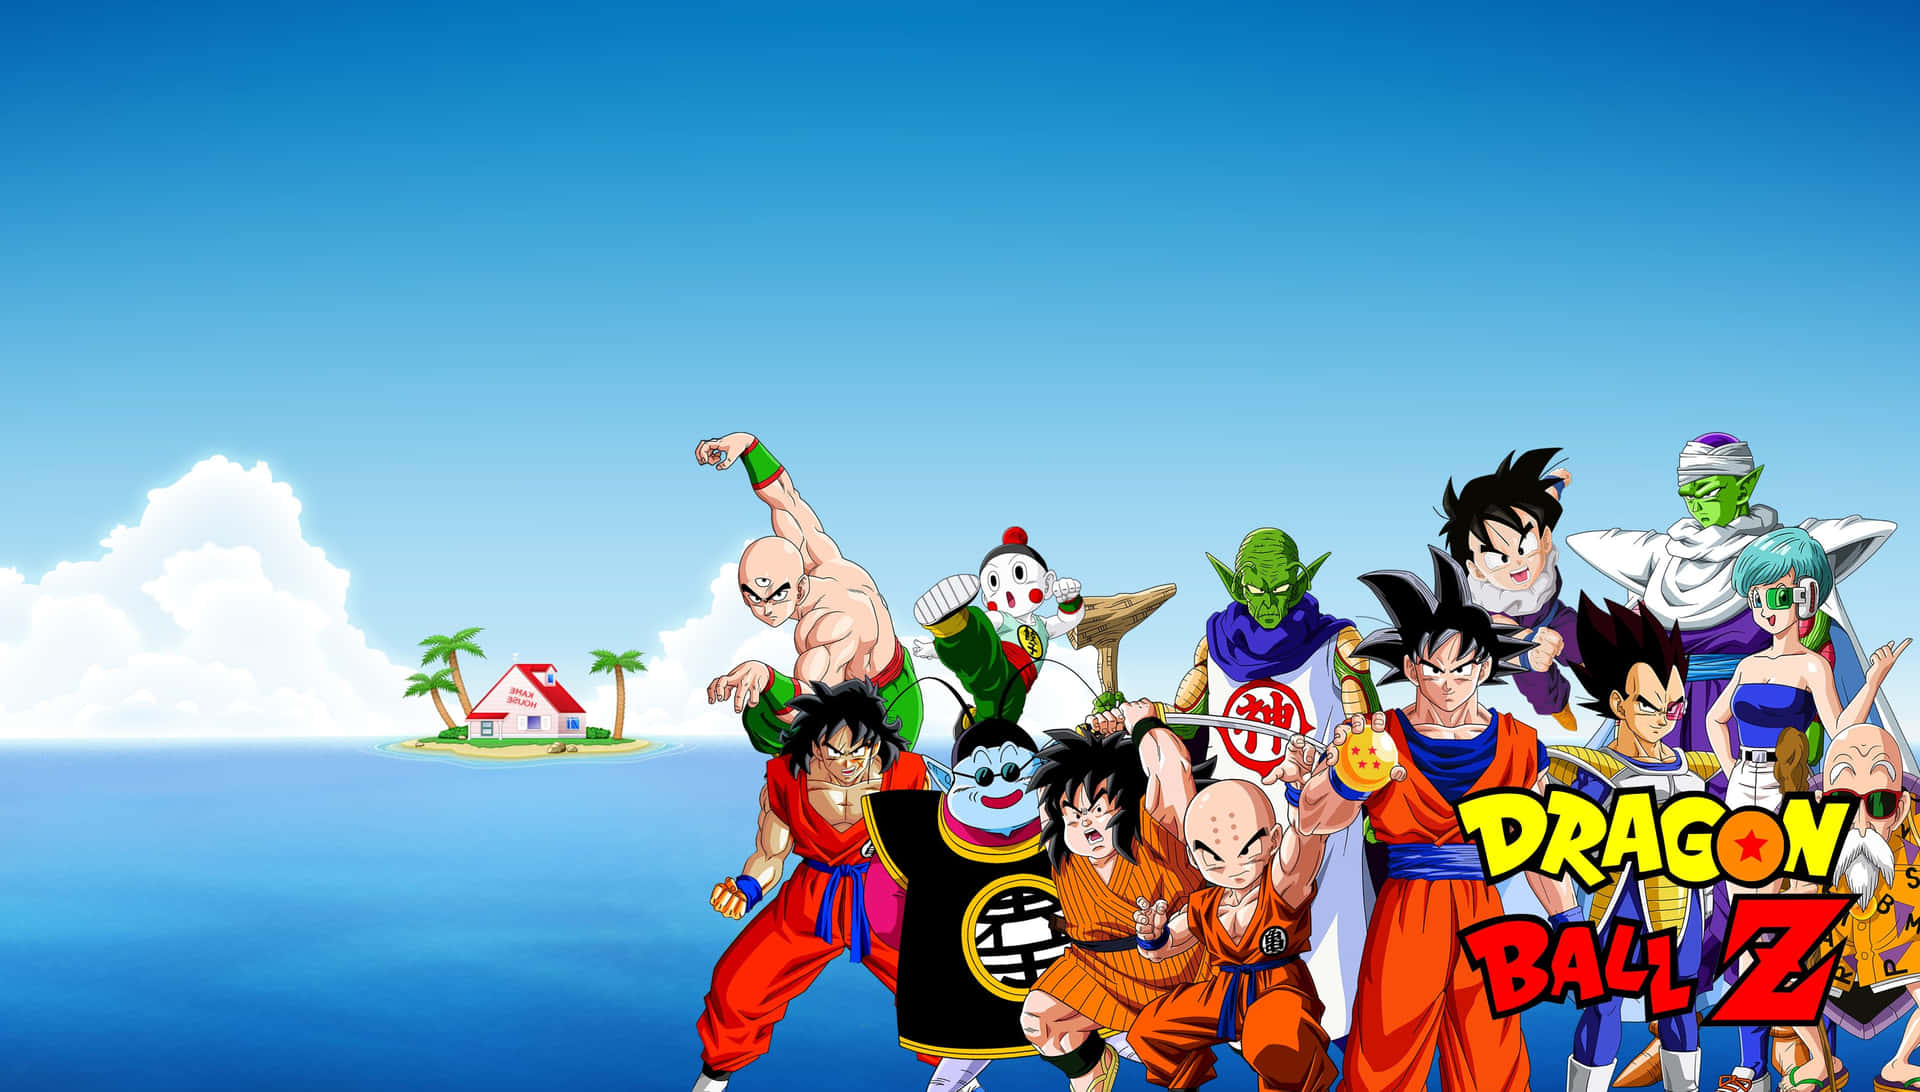 Get Ready For a Fun Adventure With Dragon Ball Z 4K Pc Wallpaper